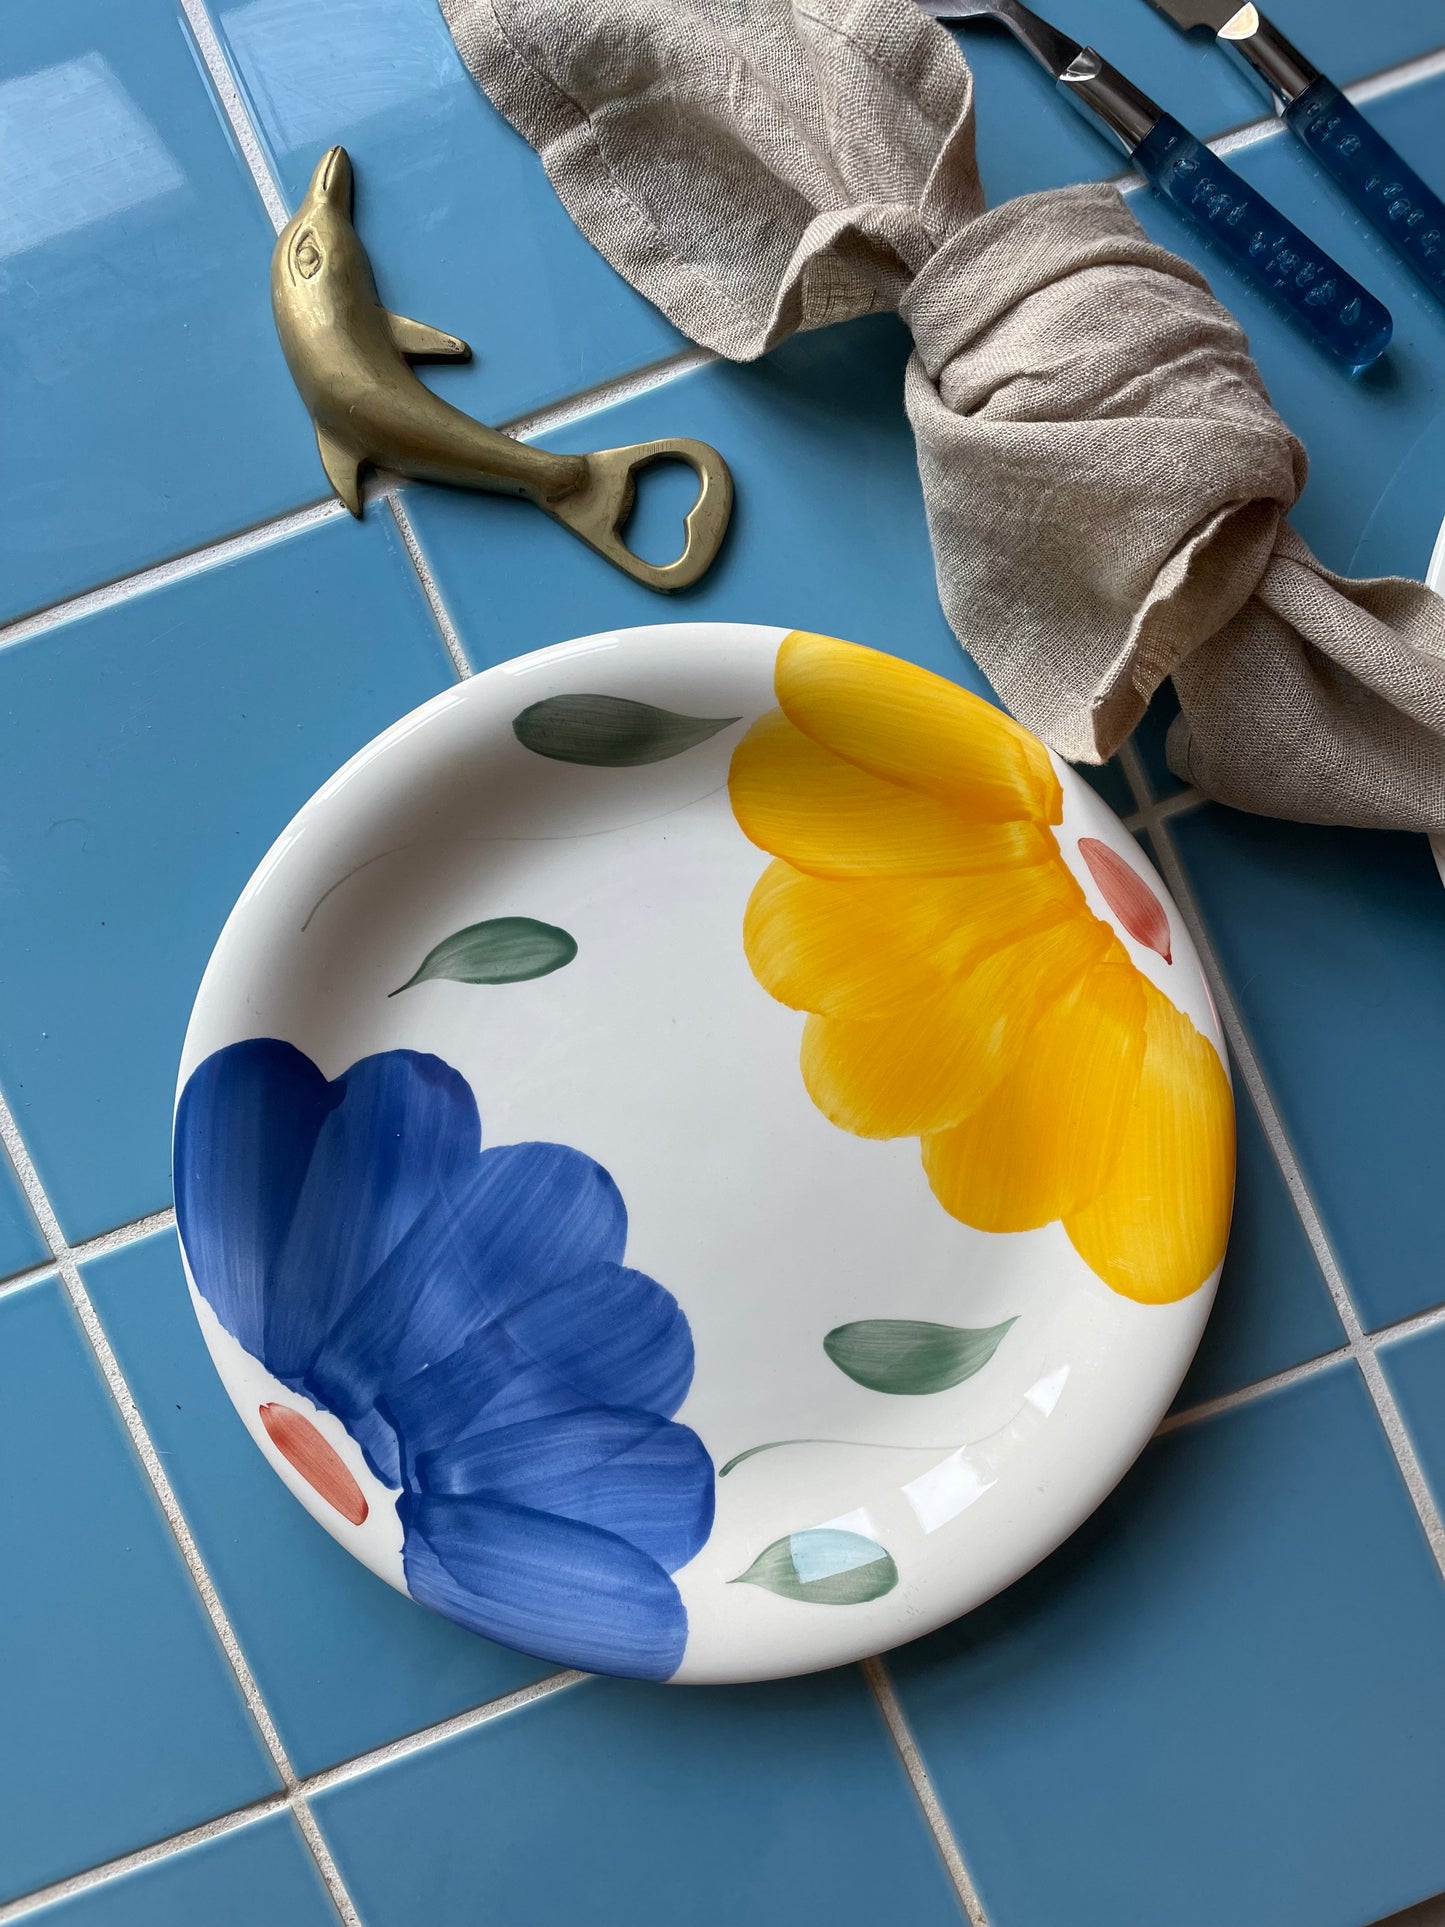 Italian dinner plates with yellow and blue flowers